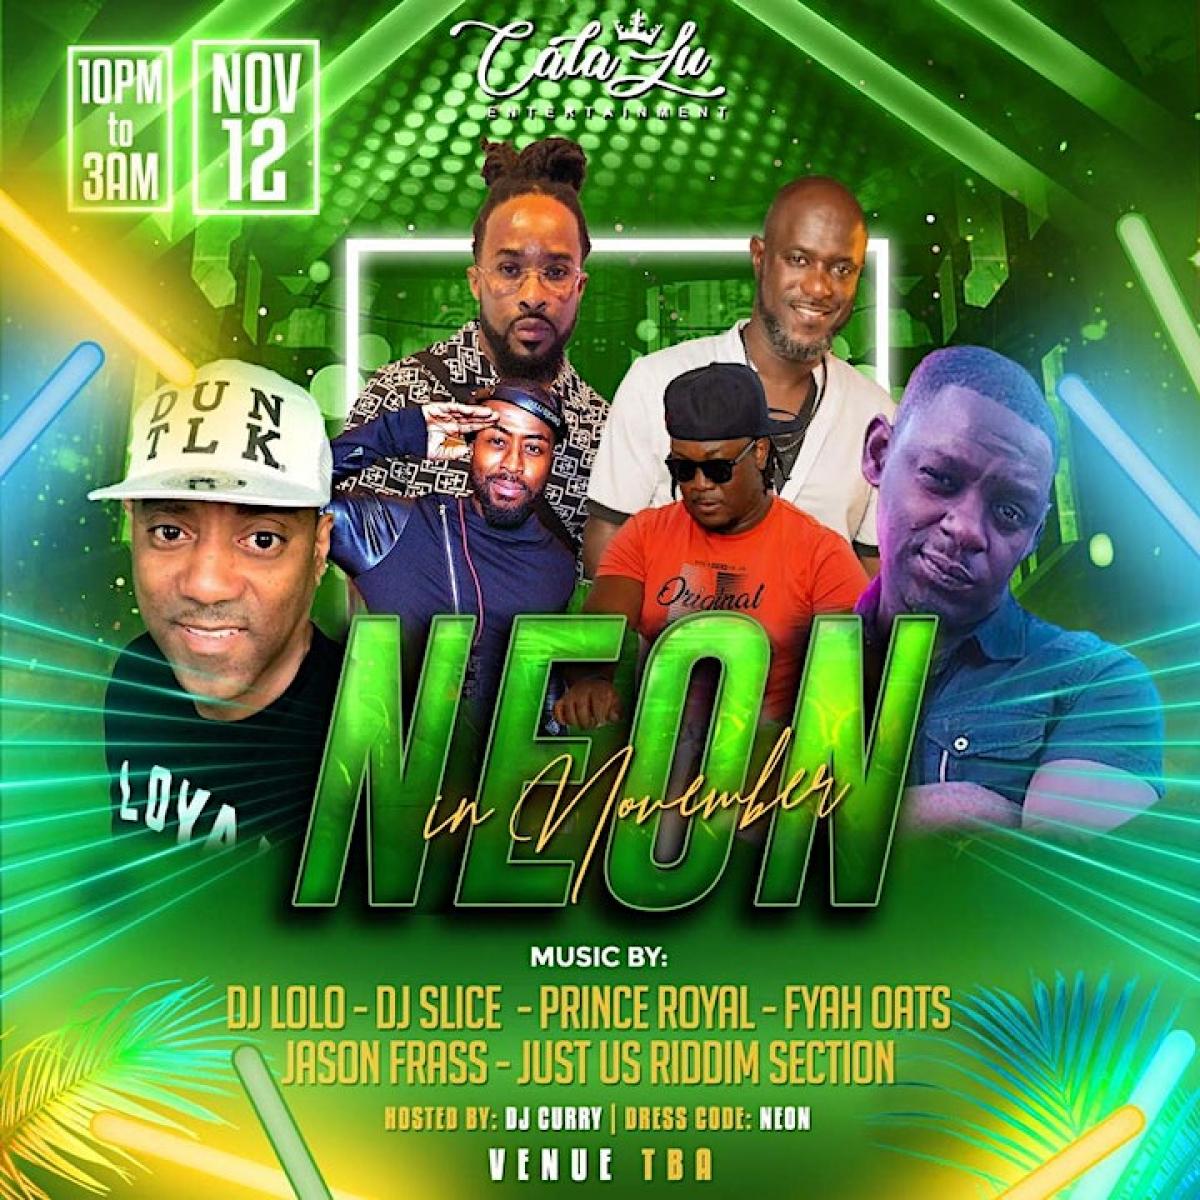 Neon In November flyer or graphic.